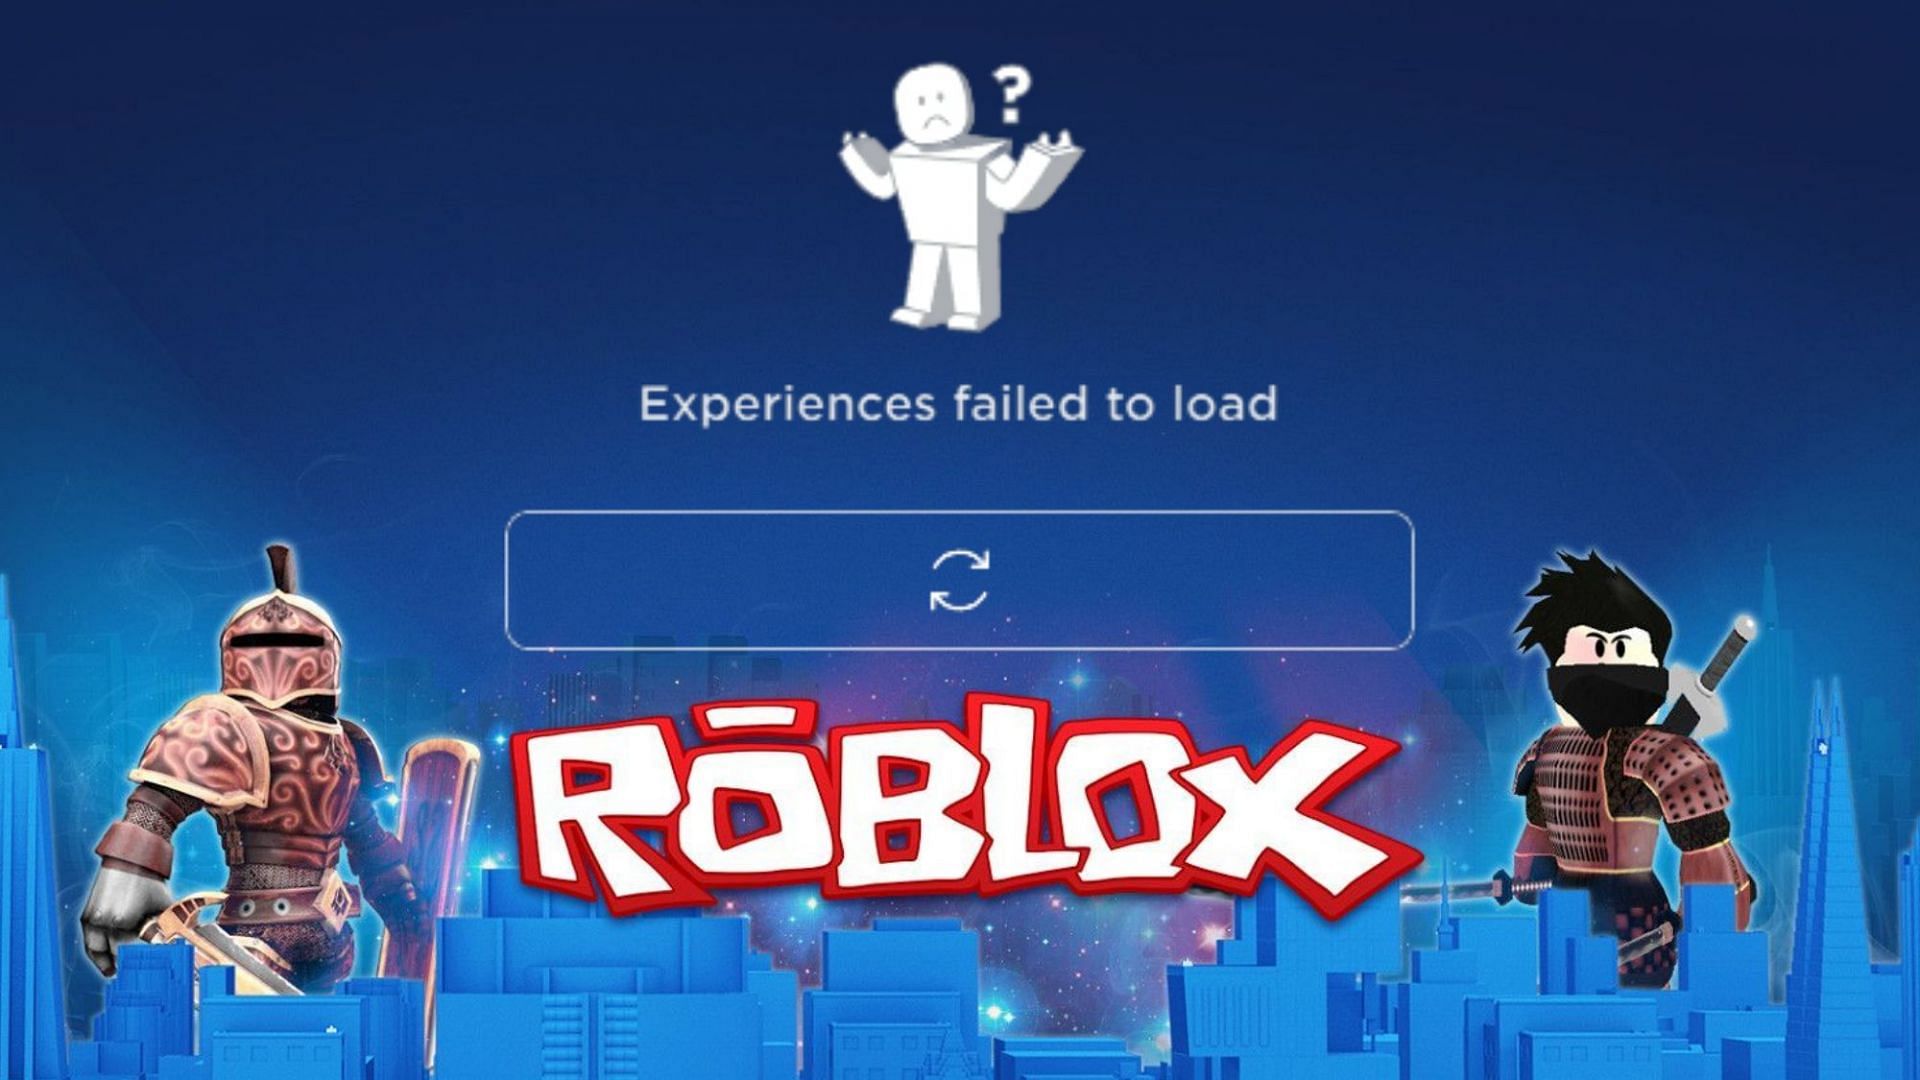 Roblox wiki is down again - Documentation Issues - Developer Forum